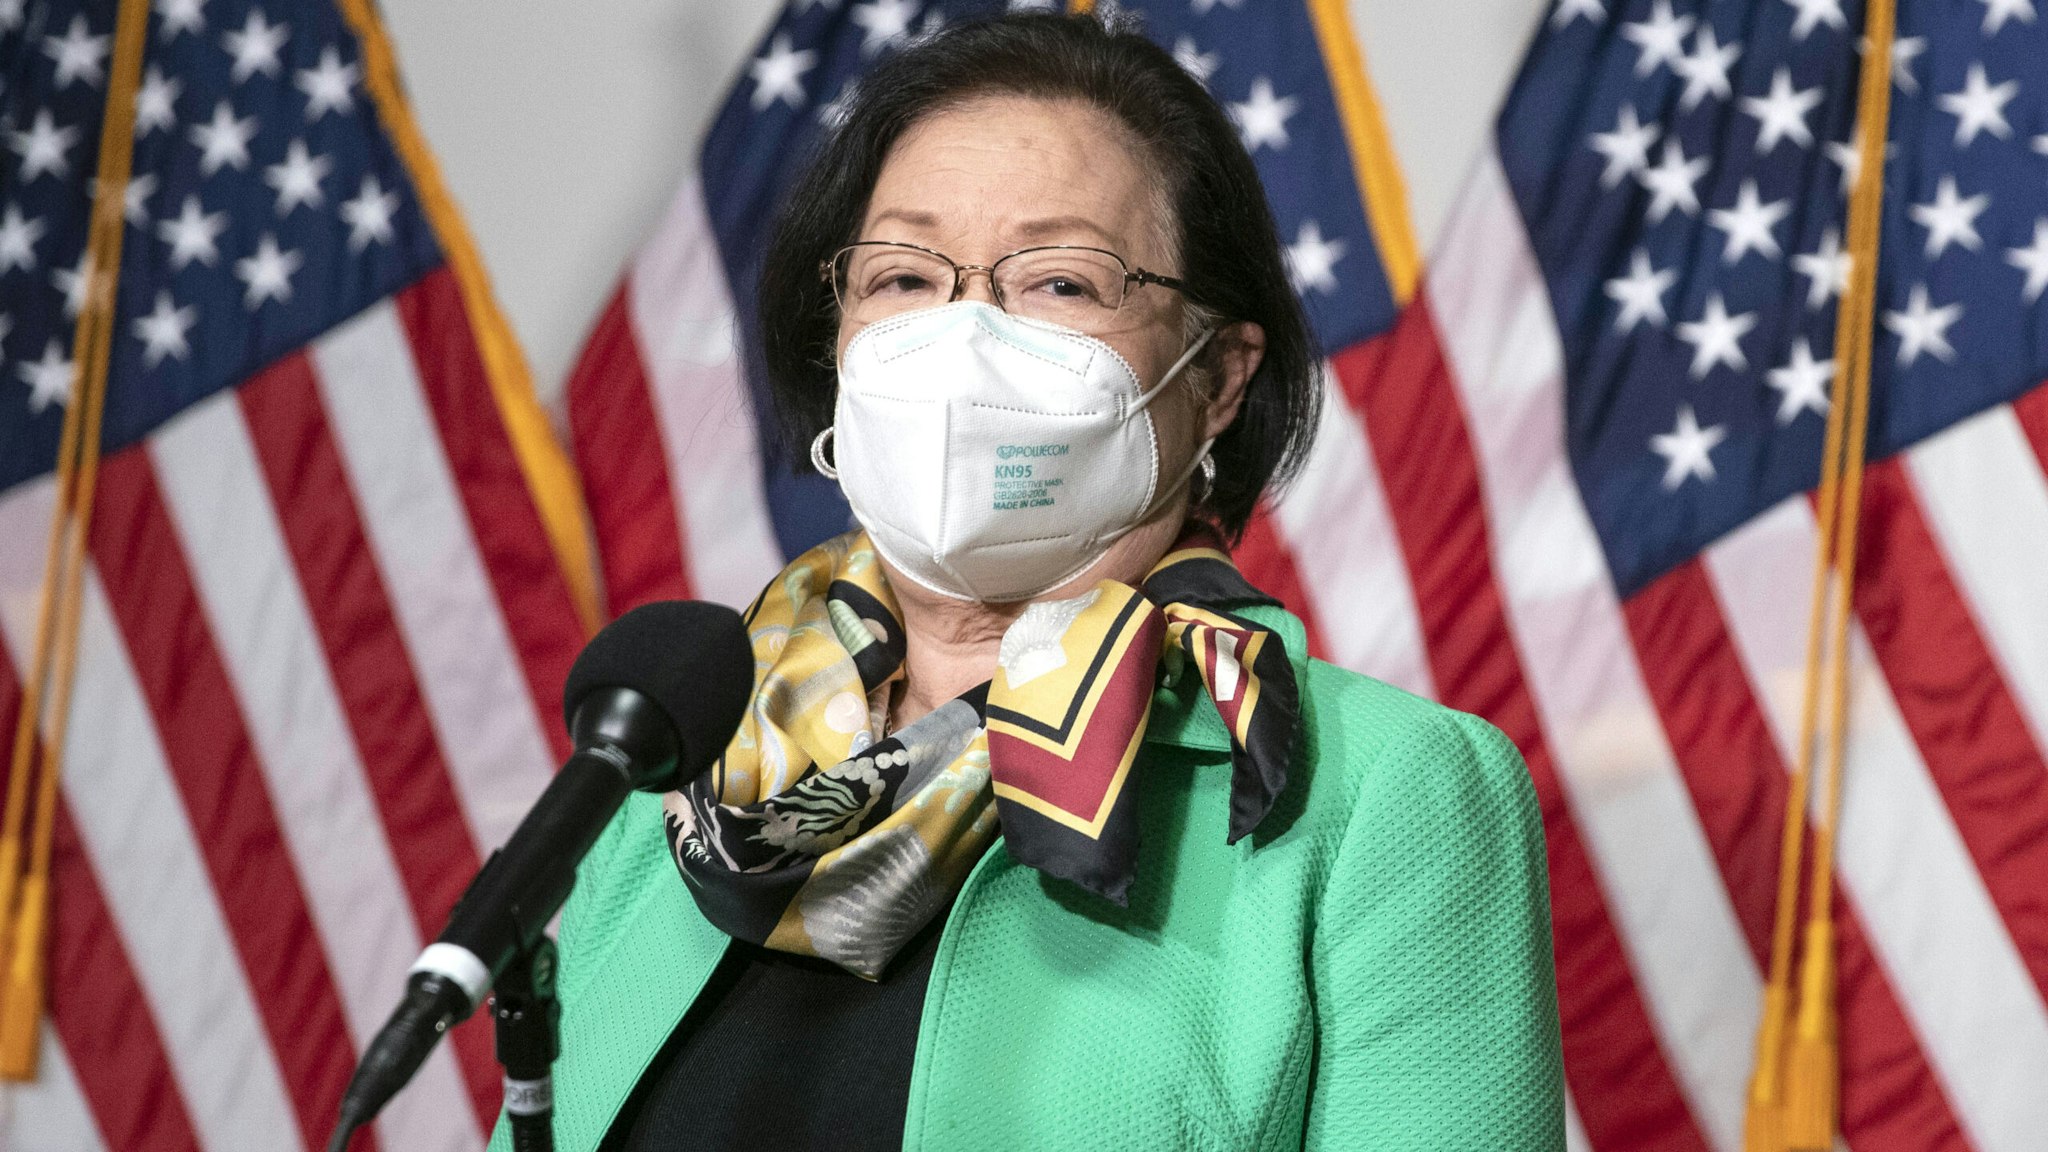 Senator Mazie Hirono, a Democrat from Hawaii, wears a protective mas while speaking to members of the media outside a Senate Judiciary Committee confirmation hearing for Merrick Garland, U.S. attorney general nominee for U.S. President Joe Biden, in Washington, D.C., U.S., on Monday, Feb. 22, 2021. Garland signaled he'll make decisions independently from Biden and is pledging he'll take the lead in prosecuting participants in the mob that attacked the Capitol on Jan. 6.